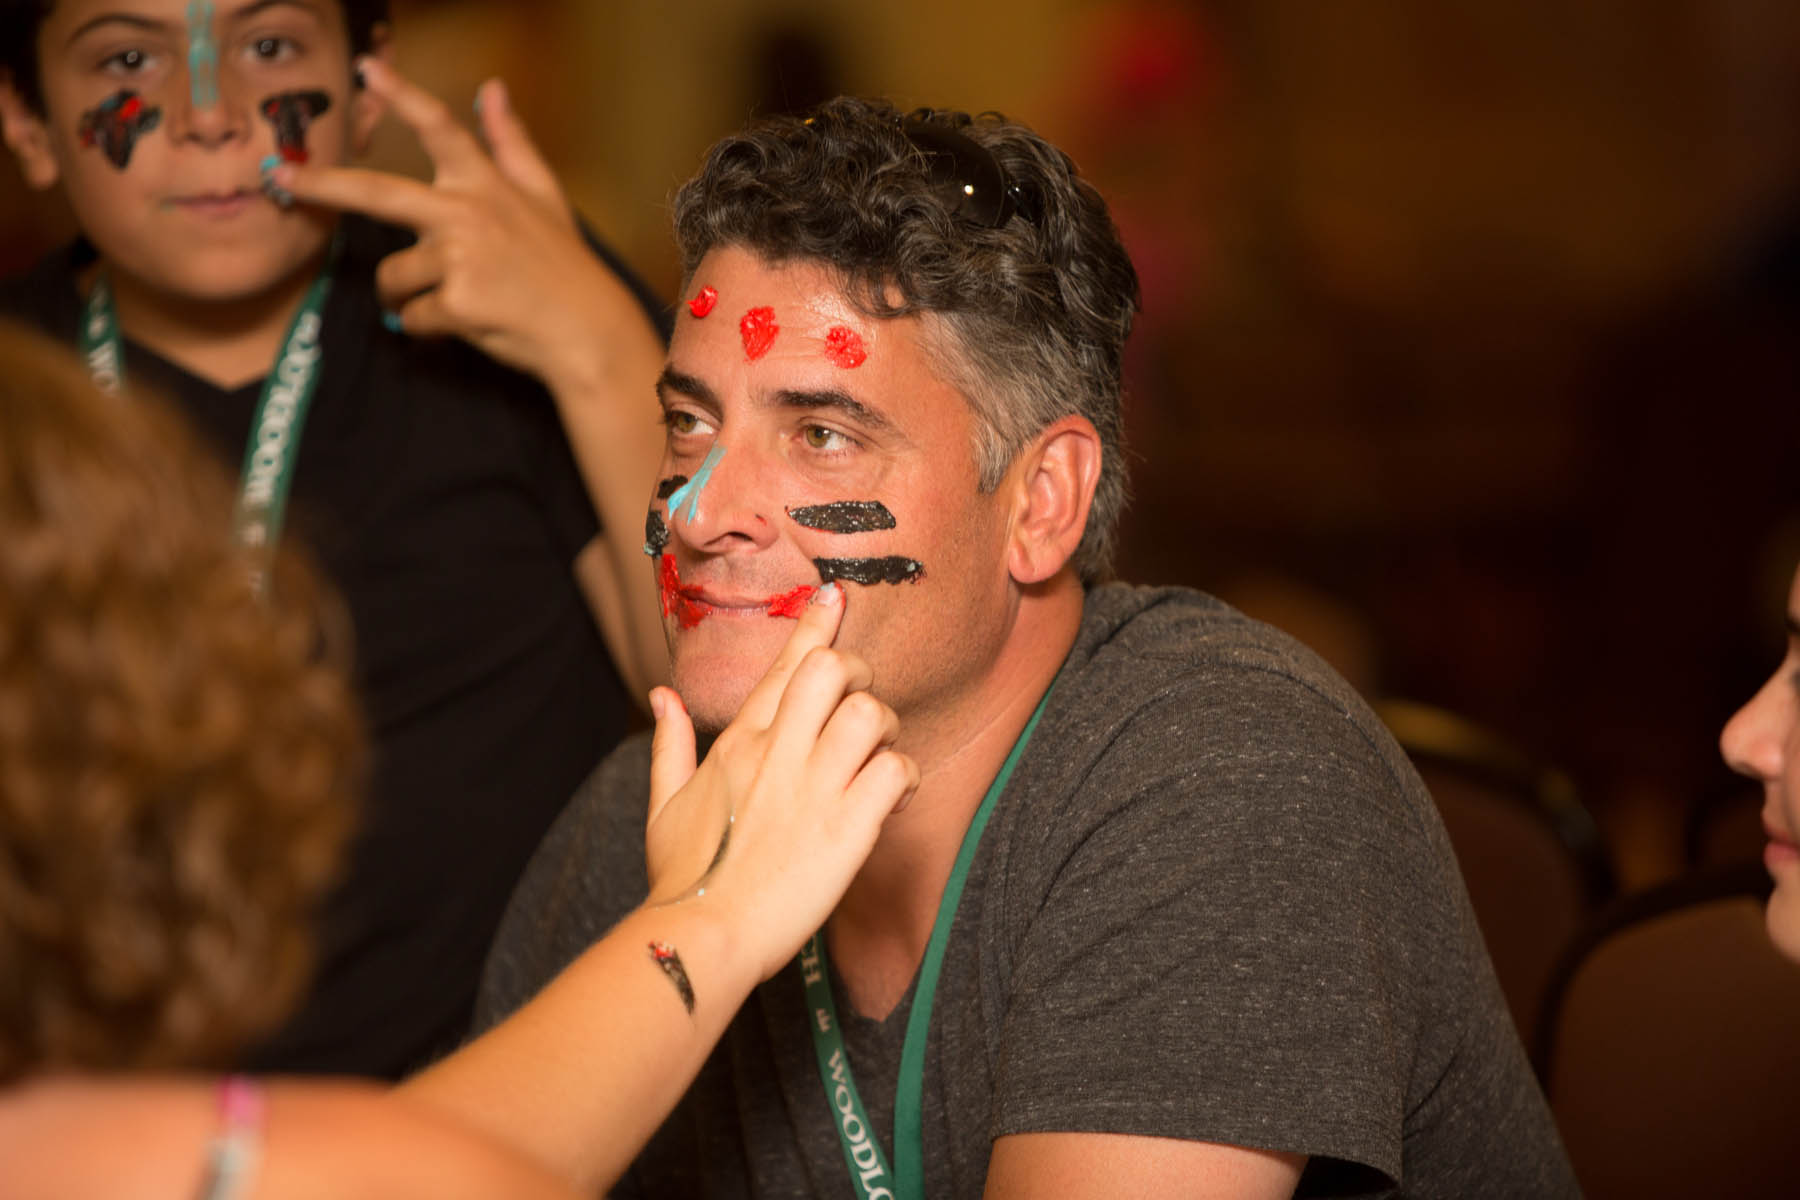 Man getting face painted with frosting.